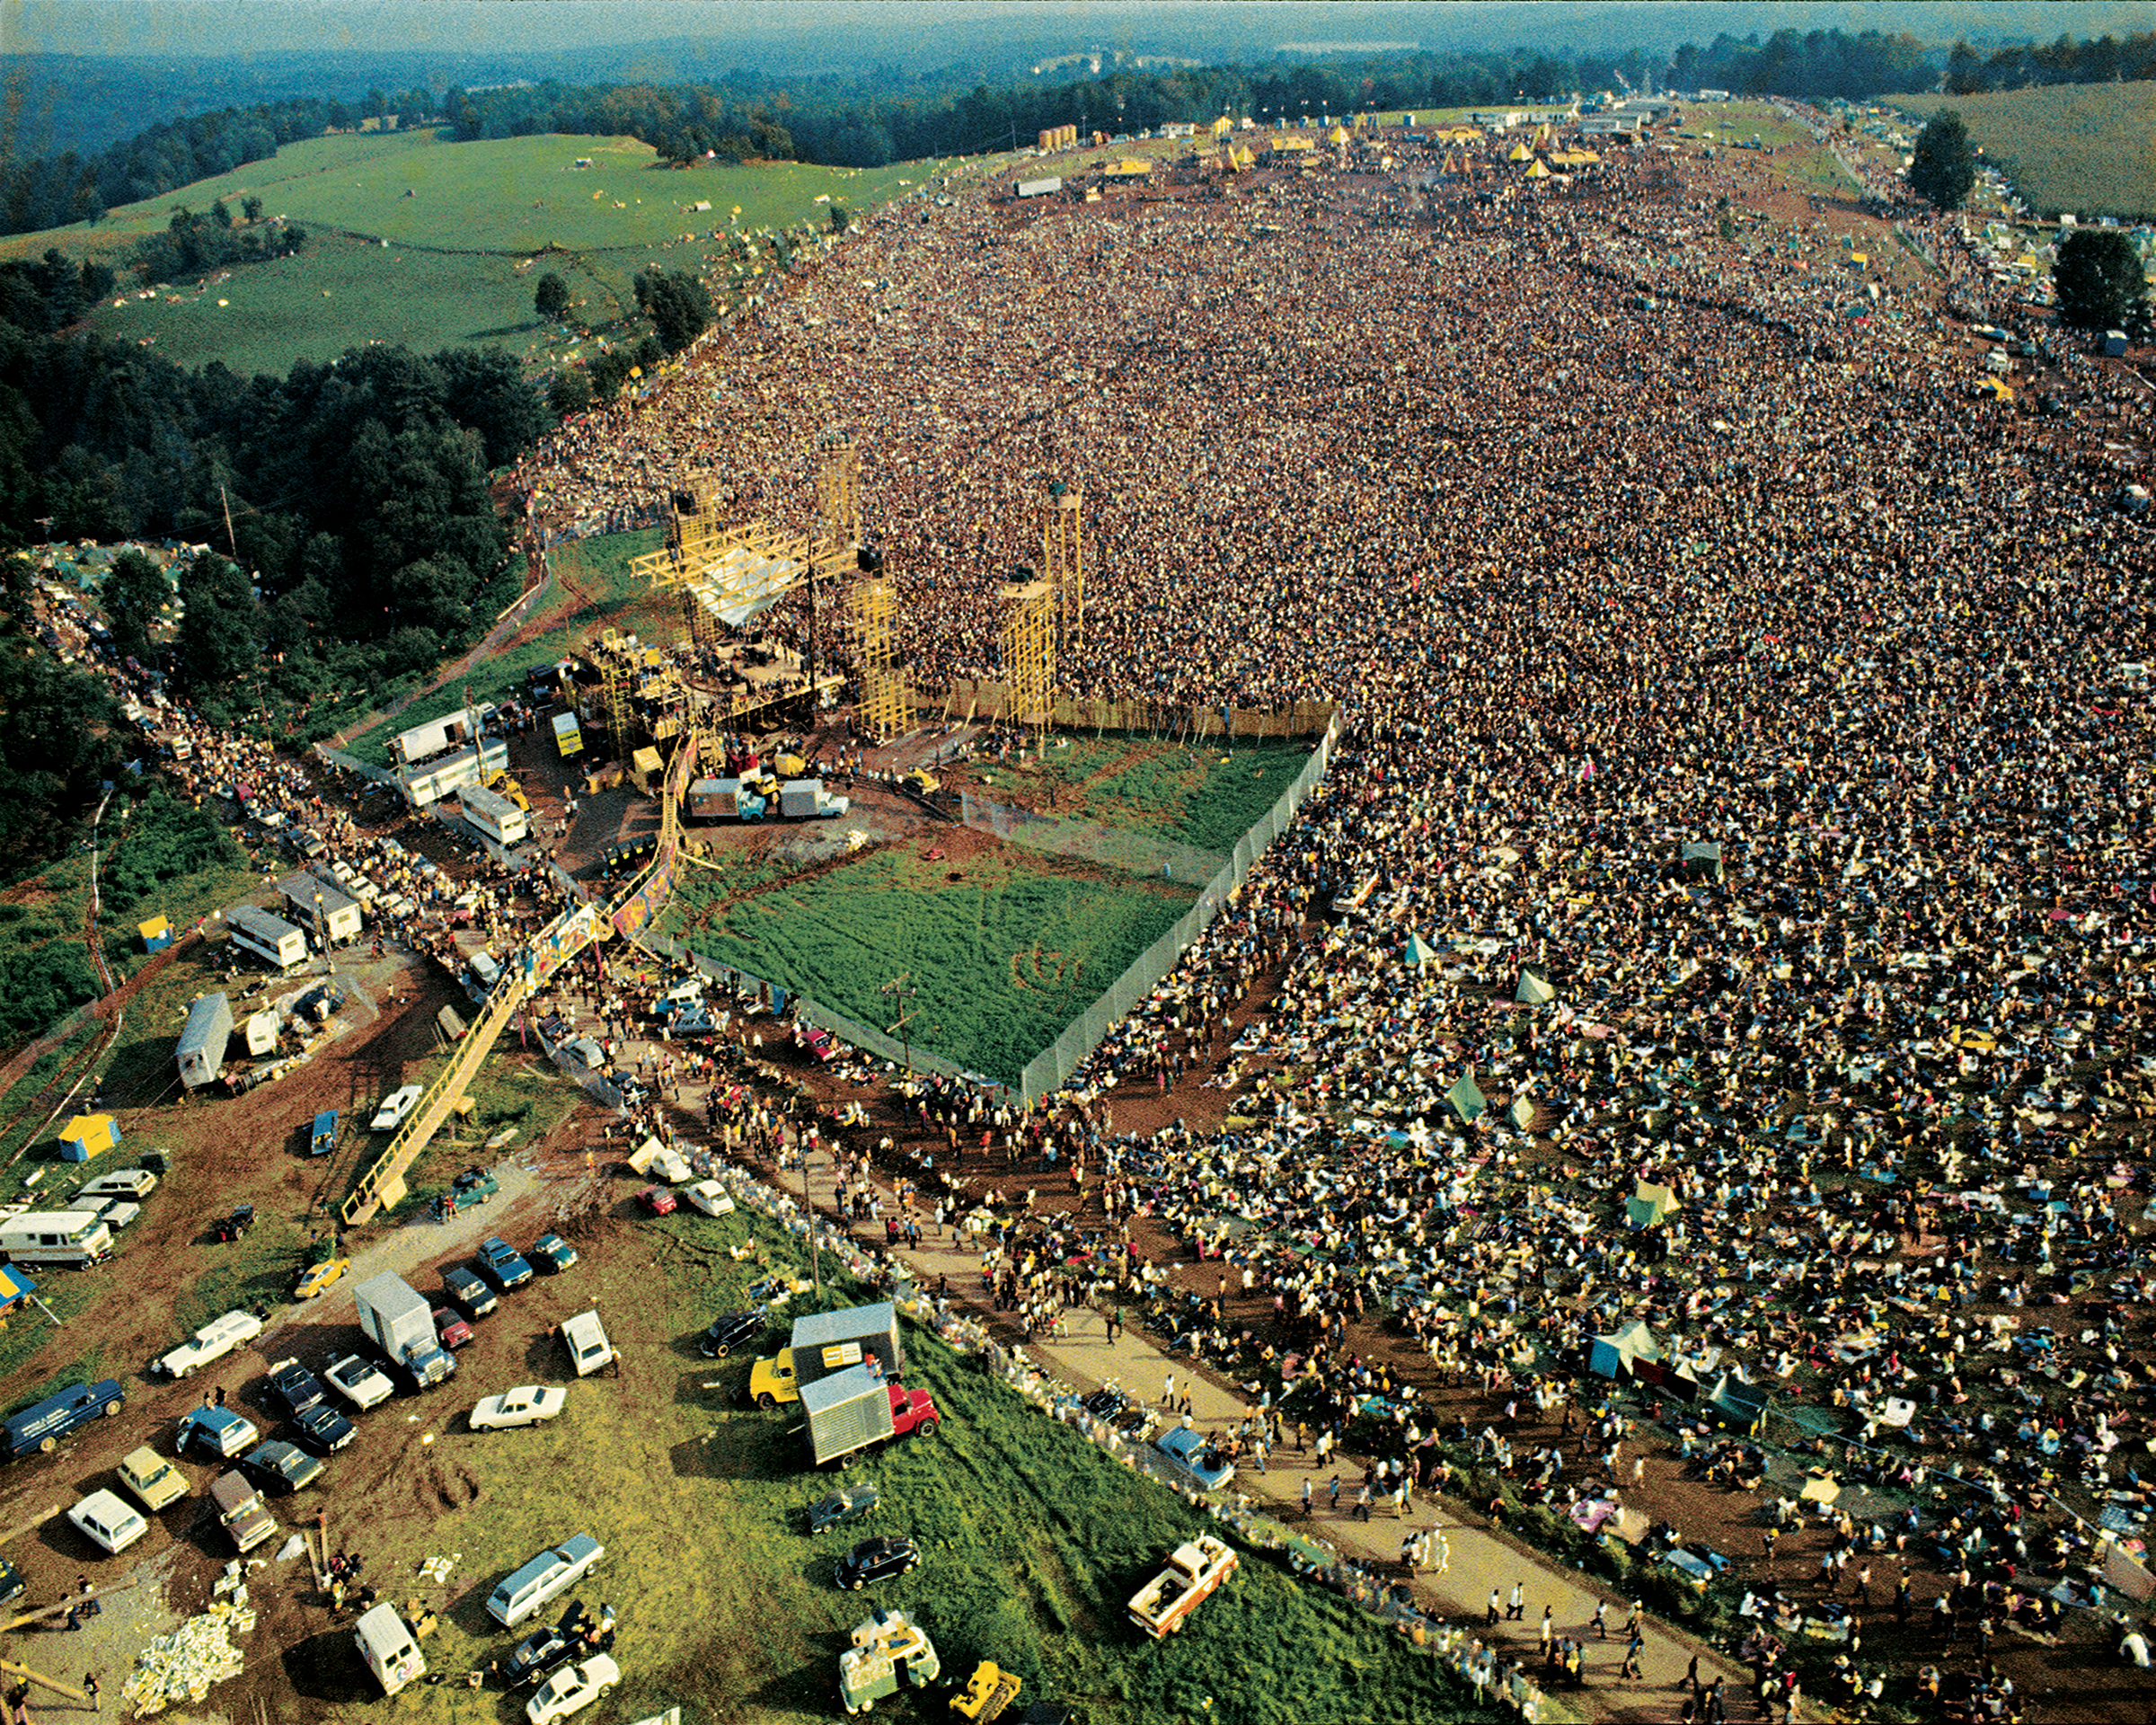 View Of The Huge Crowd At Woodstock